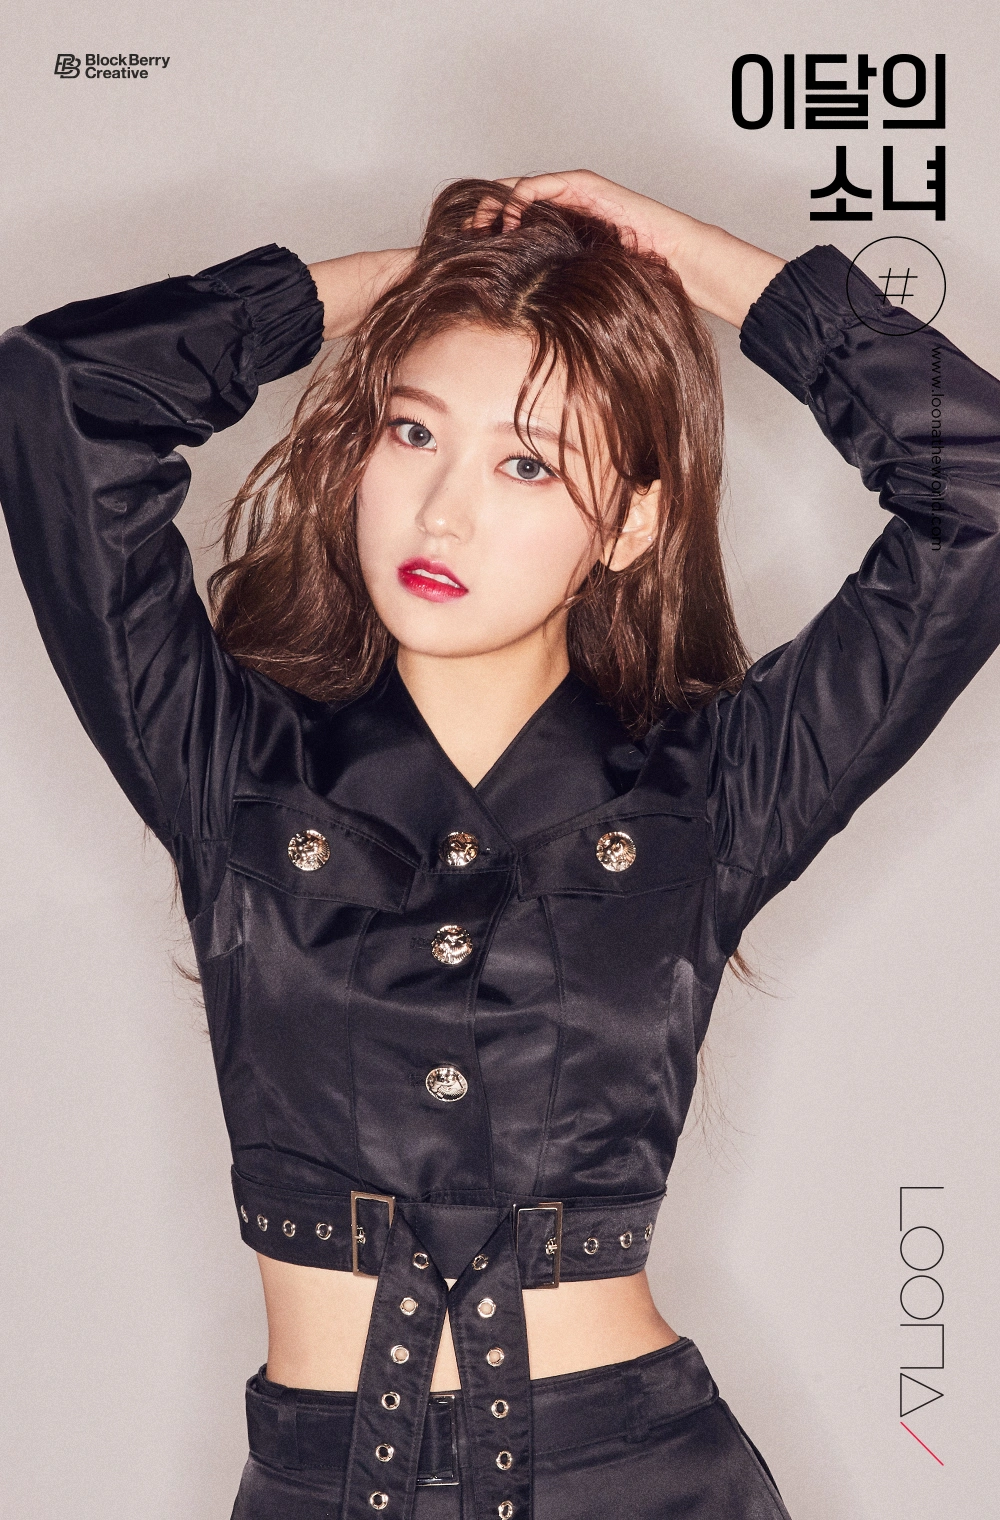 Loona # Hash Choerry Concept Teaser Picture Image Photo Kpop K-Concept 2